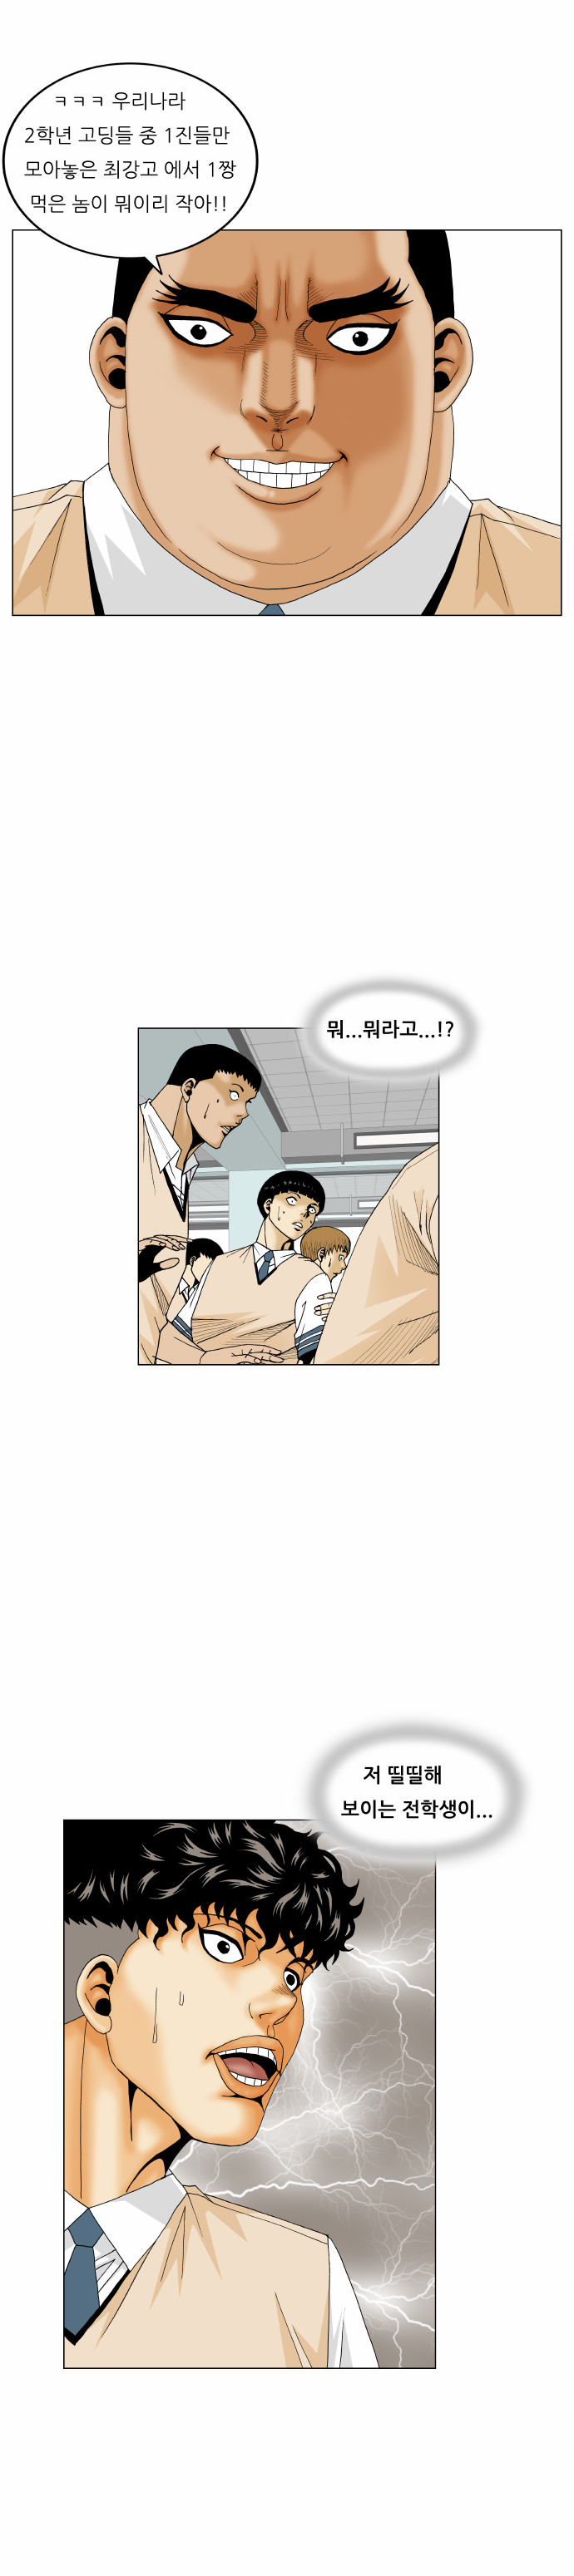 Ultimate Legend - Kang Hae Hyo - Chapter 172 - Page 3